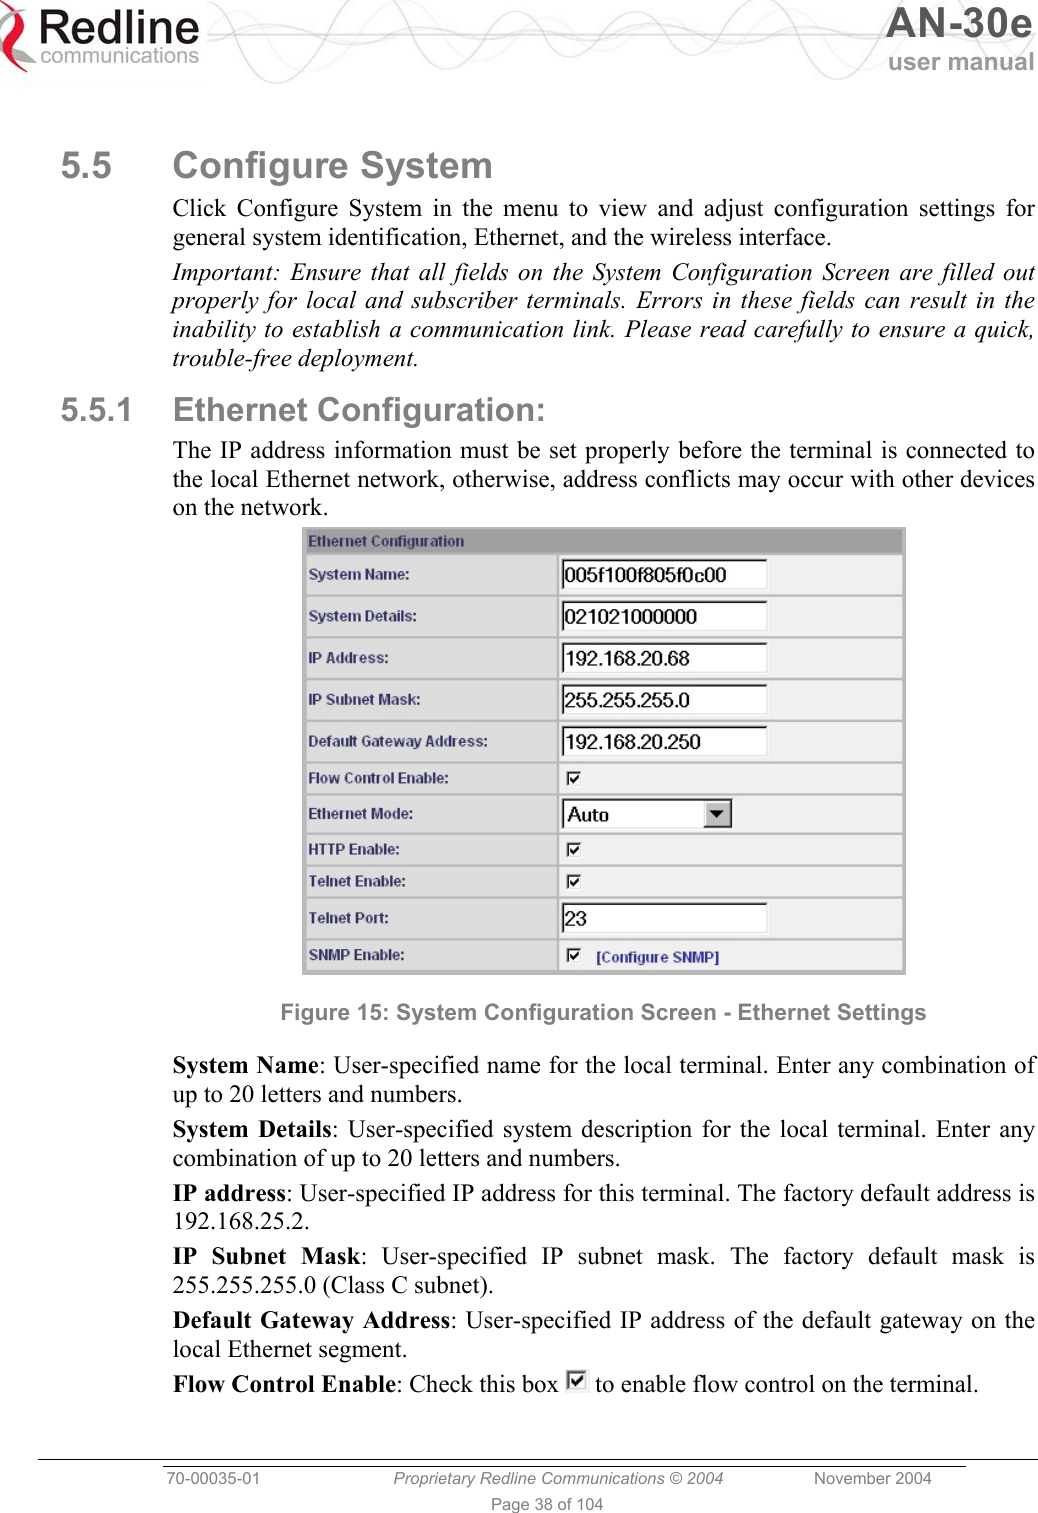   AN-30e user manual  70-00035-01  Proprietary Redline Communications © 2004 November 2004   Page 38 of 104  5.5 Configure System Click Configure System in the menu to view and adjust configuration settings for general system identification, Ethernet, and the wireless interface. Important: Ensure that all fields on the System Configuration Screen are filled out properly for local and subscriber terminals. Errors in these fields can result in the inability to establish a communication link. Please read carefully to ensure a quick, trouble-free deployment. 5.5.1 Ethernet Configuration: The IP address information must be set properly before the terminal is connected to the local Ethernet network, otherwise, address conflicts may occur with other devices on the network.  Figure 15: System Configuration Screen - Ethernet Settings System Name: User-specified name for the local terminal. Enter any combination of up to 20 letters and numbers. System Details: User-specified system description for the local terminal. Enter any combination of up to 20 letters and numbers. IP address: User-specified IP address for this terminal. The factory default address is 192.168.25.2. IP Subnet Mask: User-specified IP subnet mask. The factory default mask is 255.255.255.0 (Class C subnet). Default Gateway Address: User-specified IP address of the default gateway on the local Ethernet segment. Flow Control Enable: Check this box   to enable flow control on the terminal. 